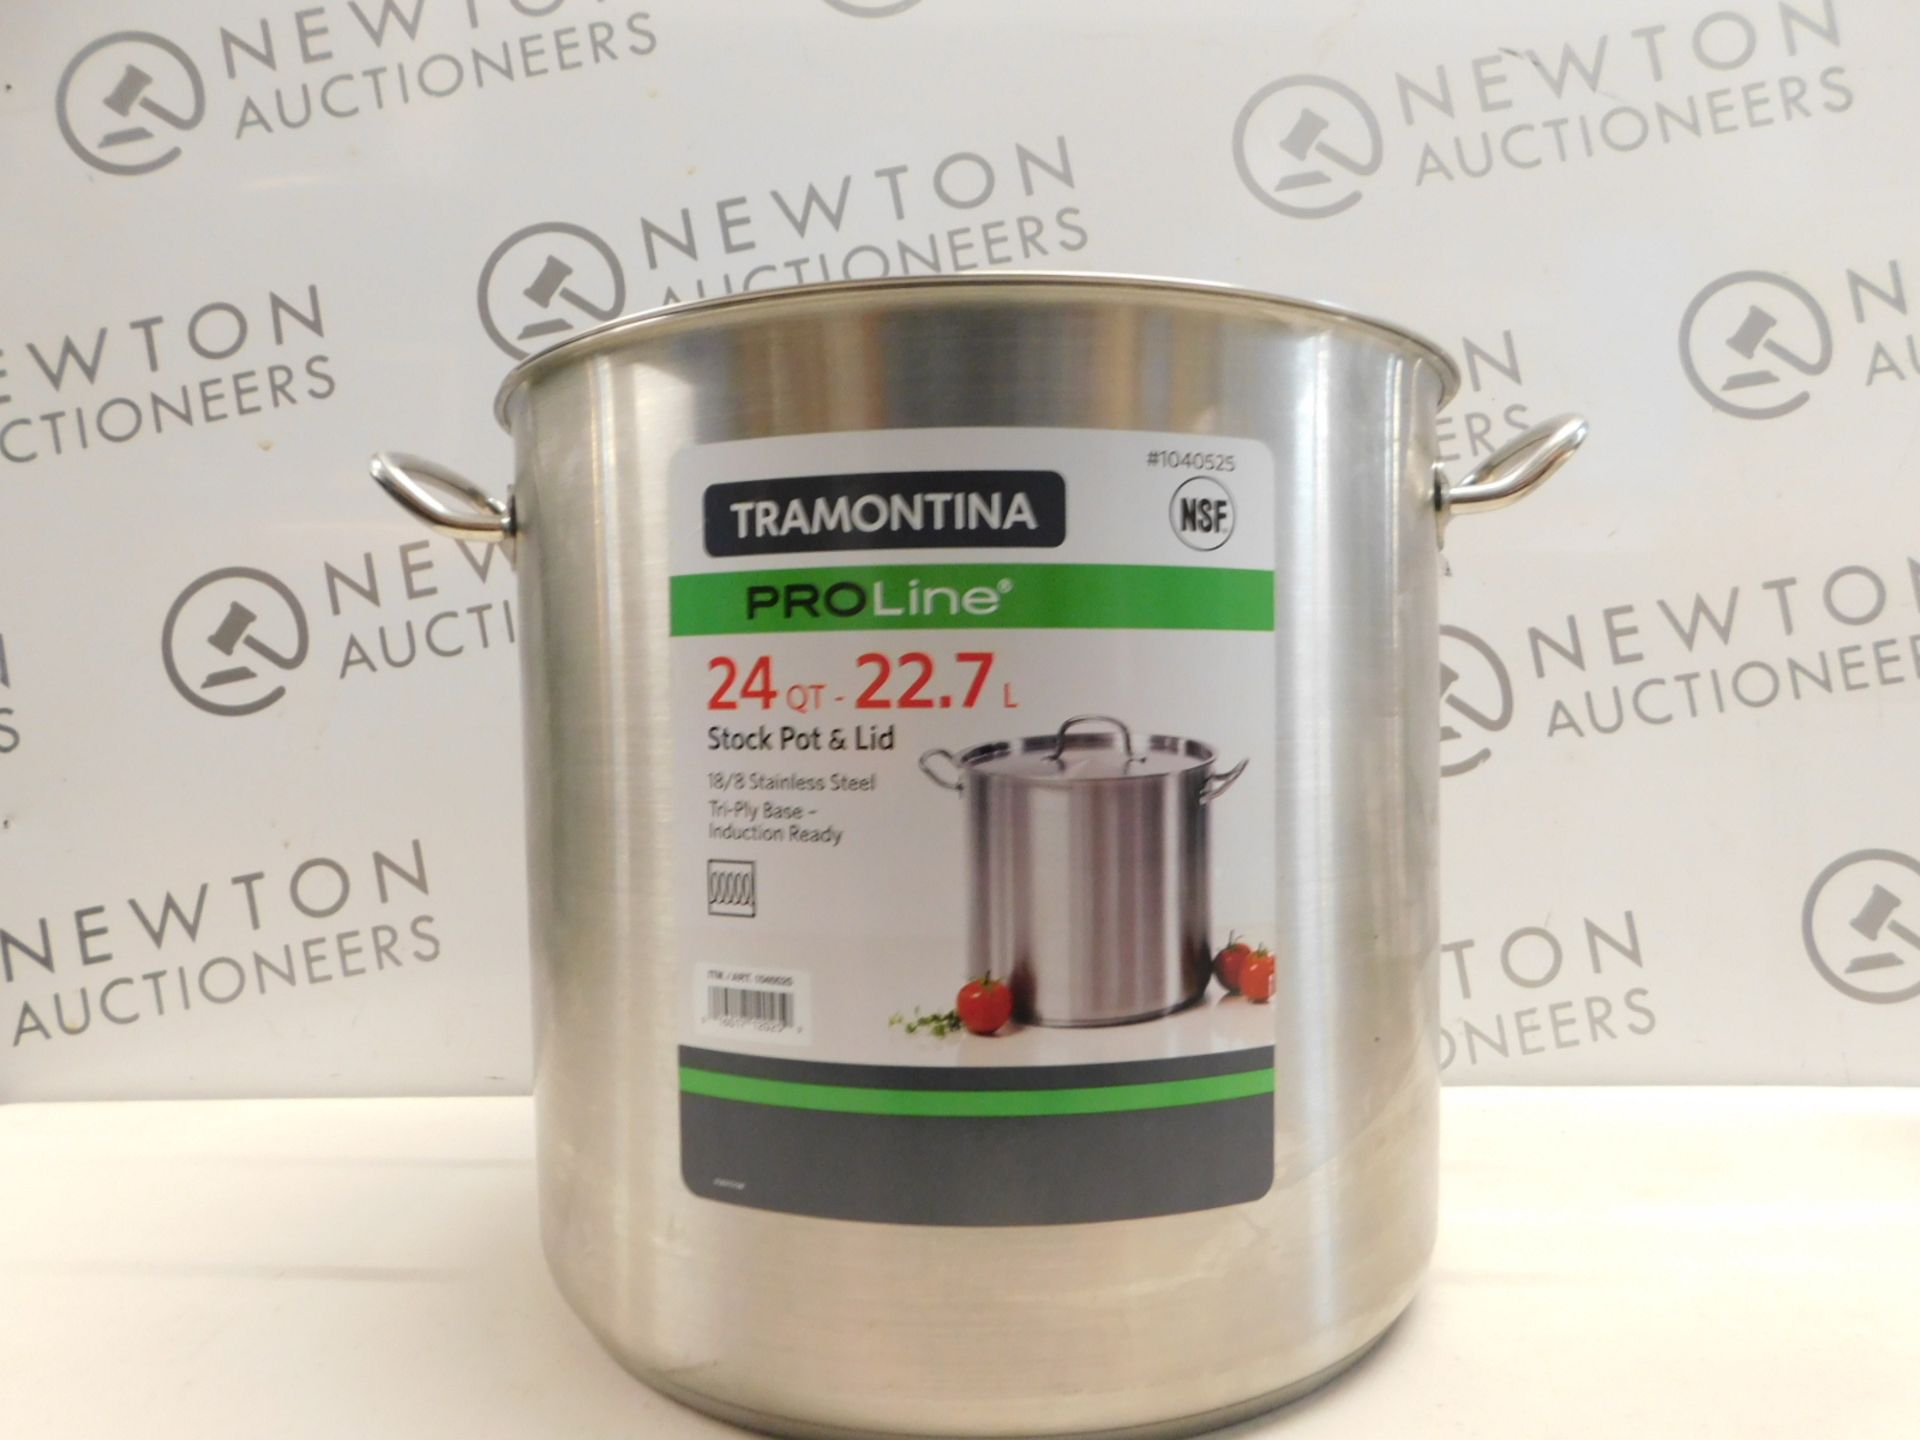 1 TRAMONTINA PRO LINE 24 QUART STAINLESS STEEL STOCK POT WITH LID RRP Â£64.99 (EXCELLENT CONDITION)